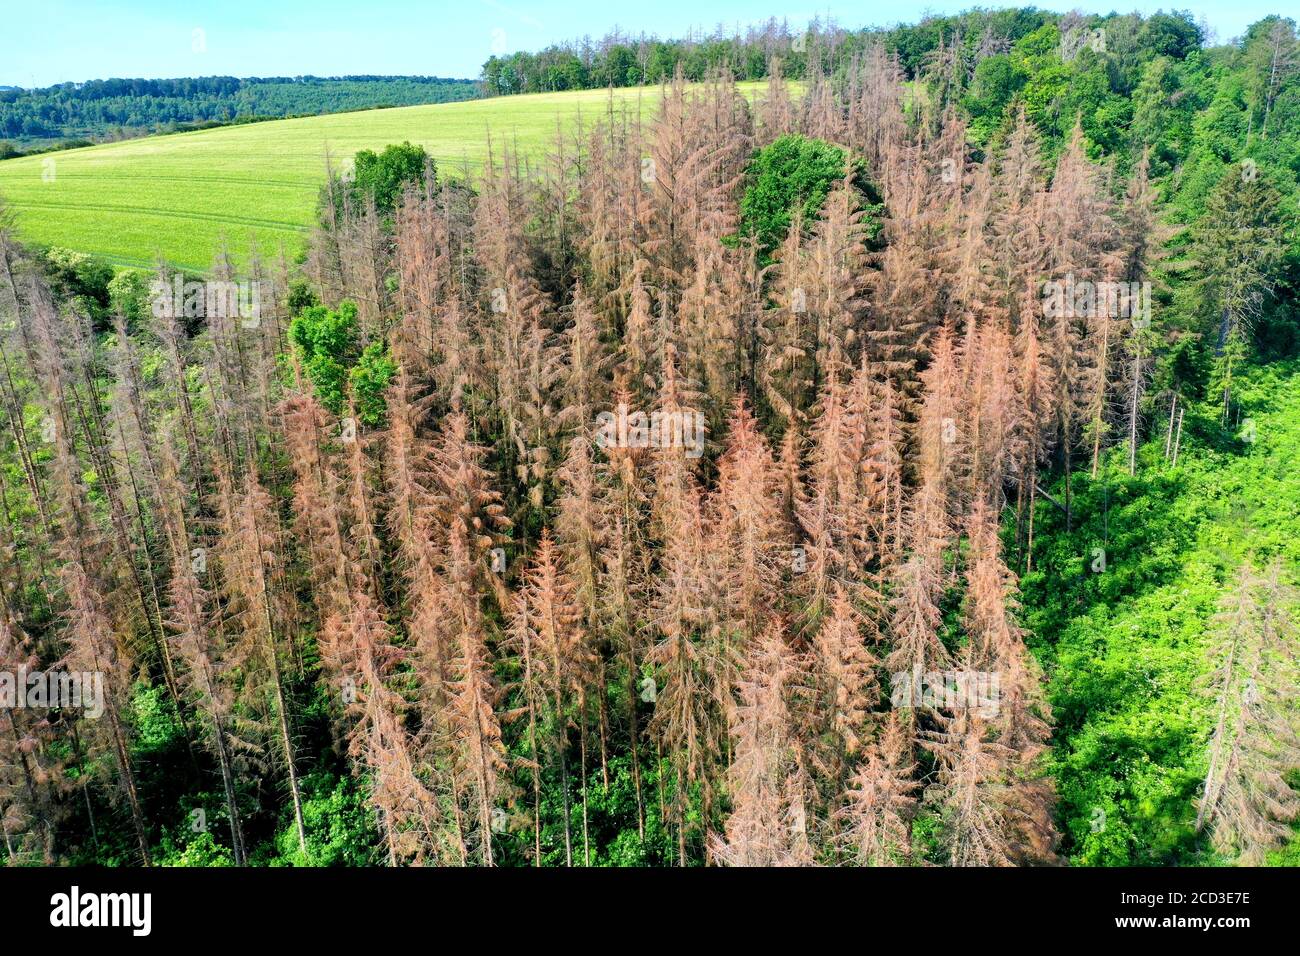 Norway Spruce Picea Abies Dead Spruce Forest Caused By Dryness And Bark Beetle 02 06 Aerial View Germany Stock Photo Alamy